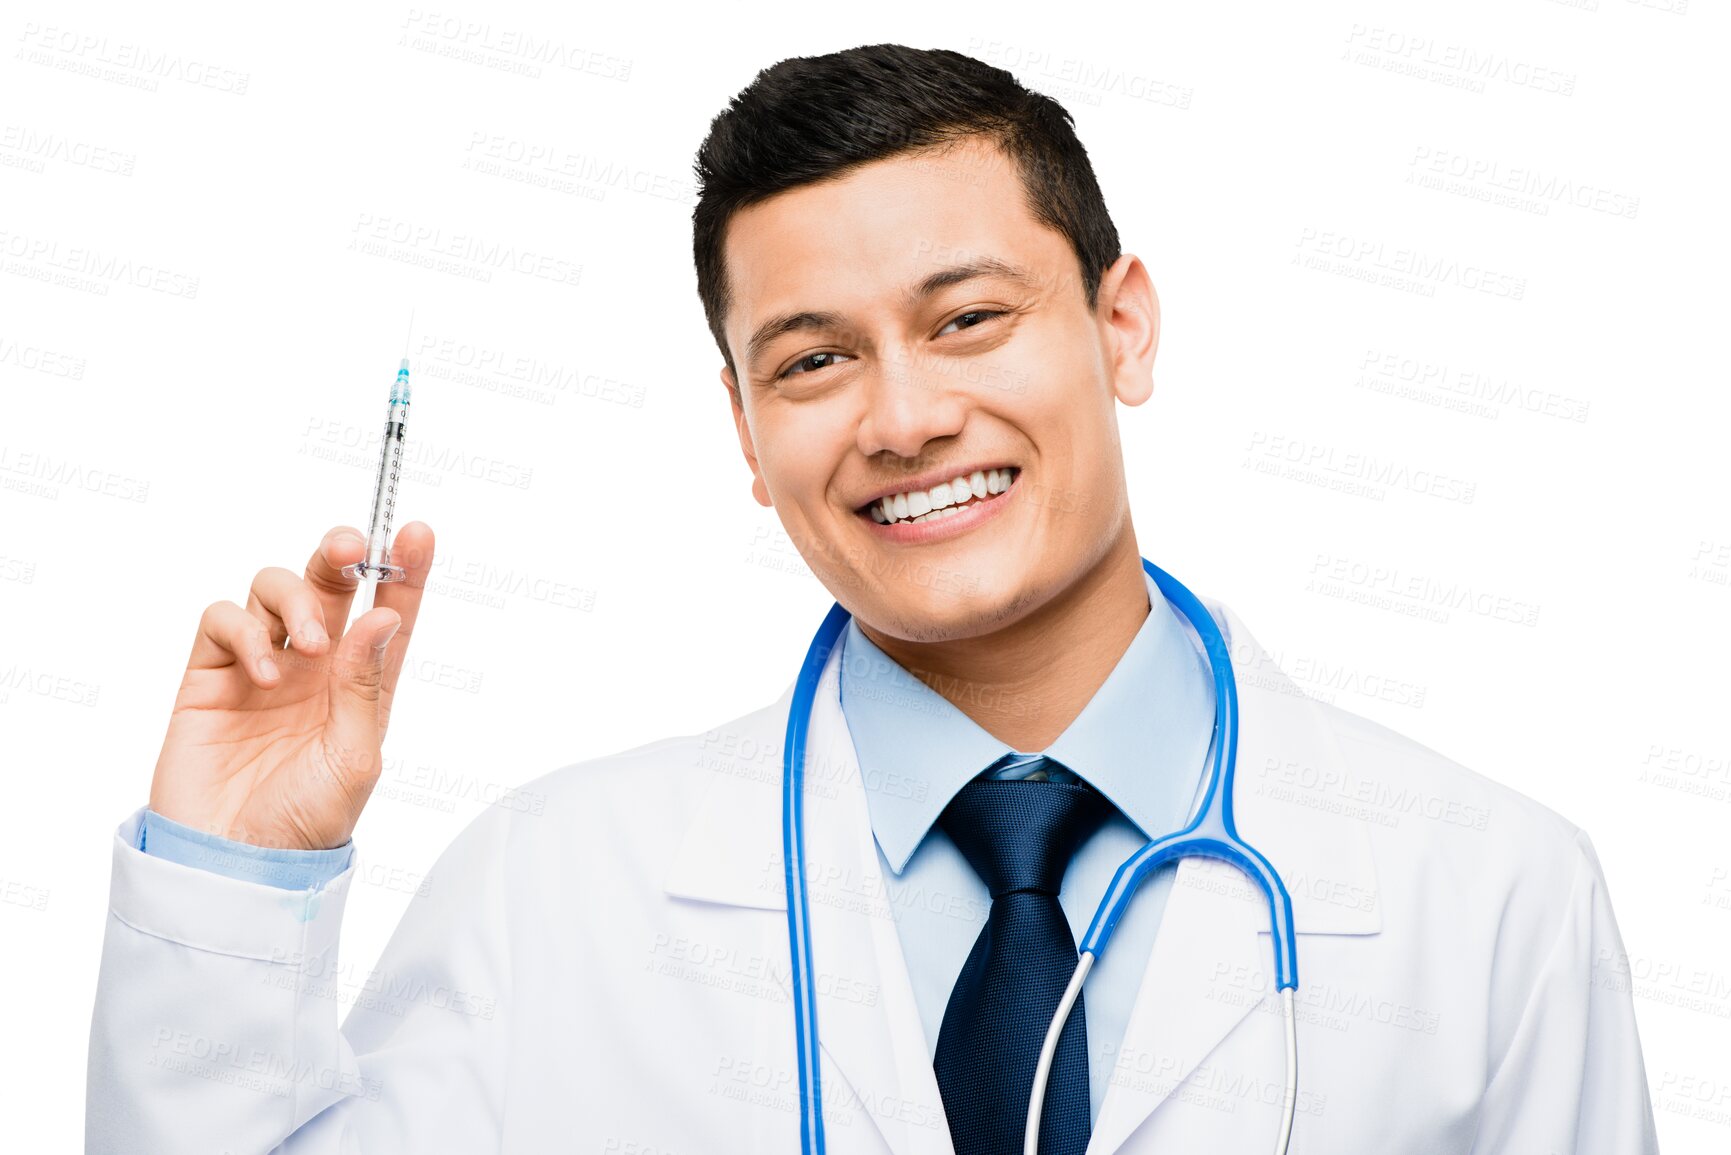 Buy stock photo Portrait, doctor or happy man with vaccine, needle or injection isolated on transparent png background. Face, healthcare medicine syringe or medical worker with vaccination for a virus protection